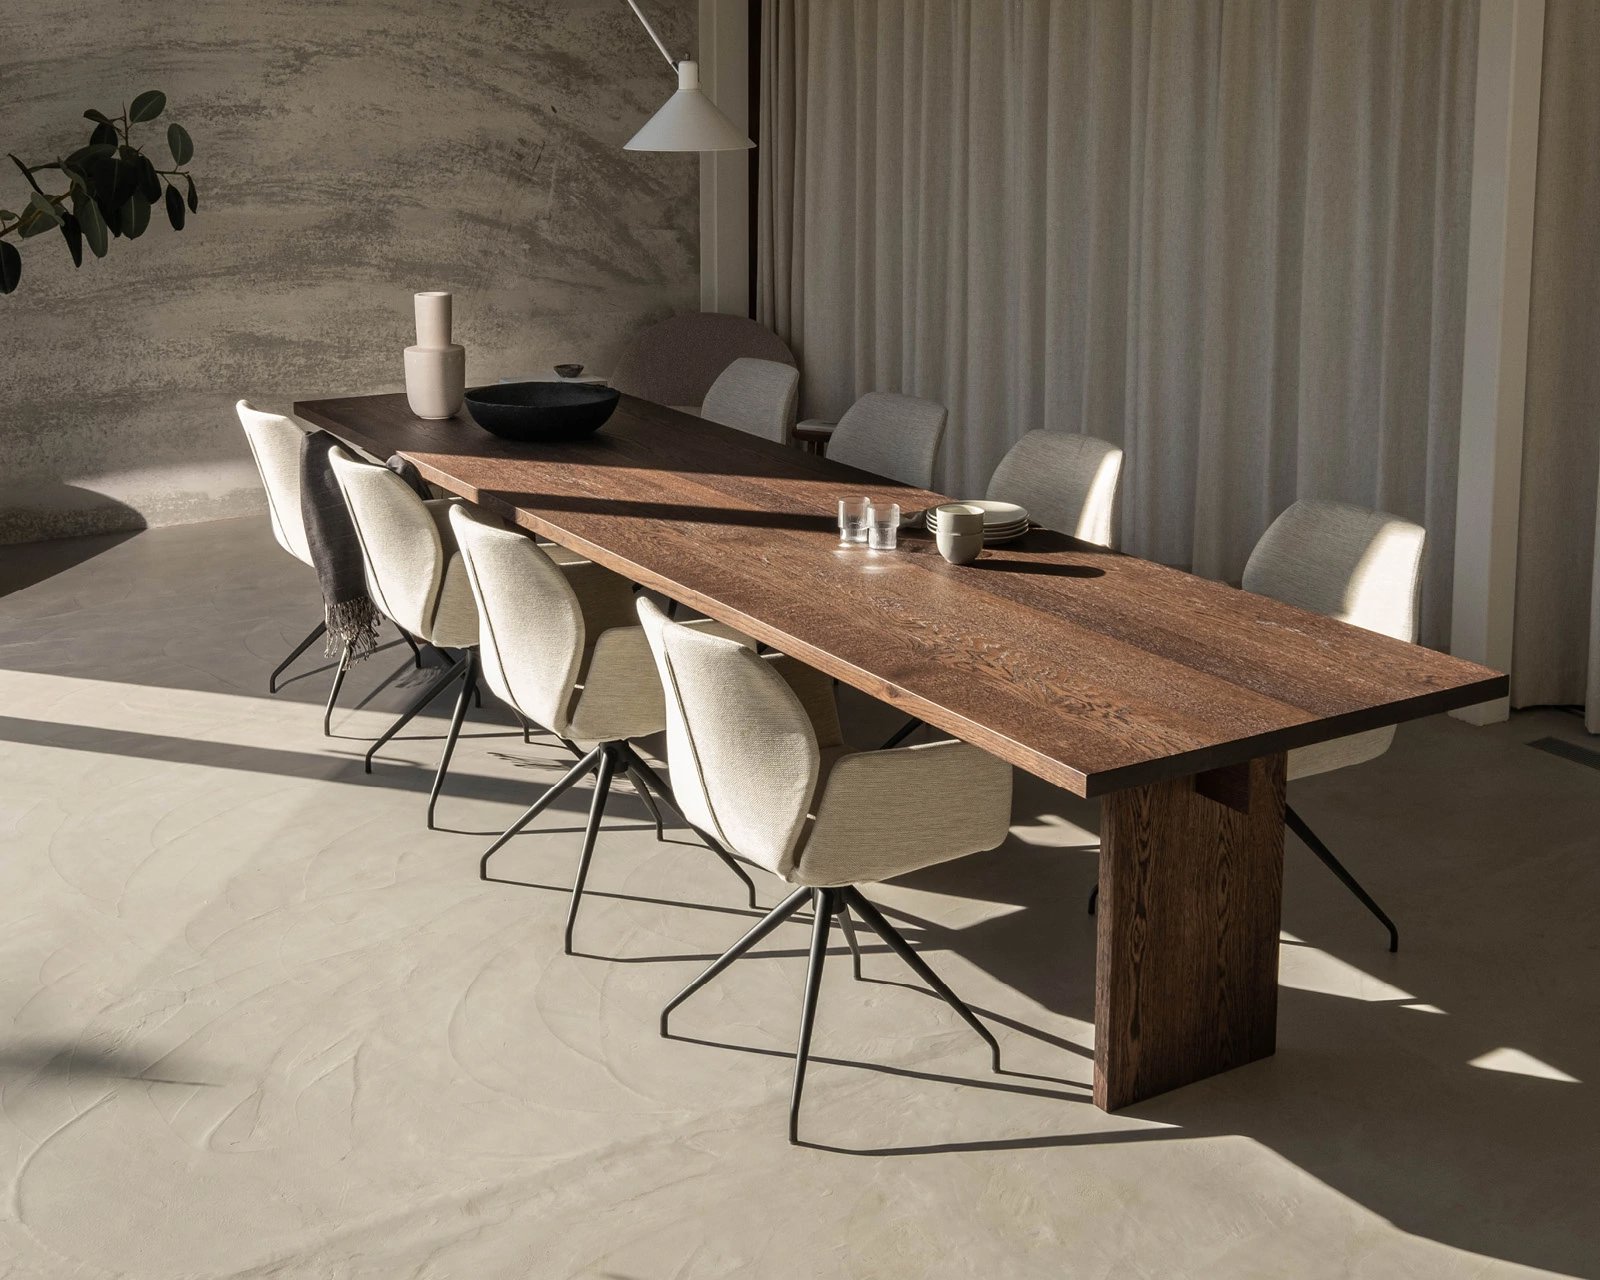 Table du Sud x Anne Claus dining table